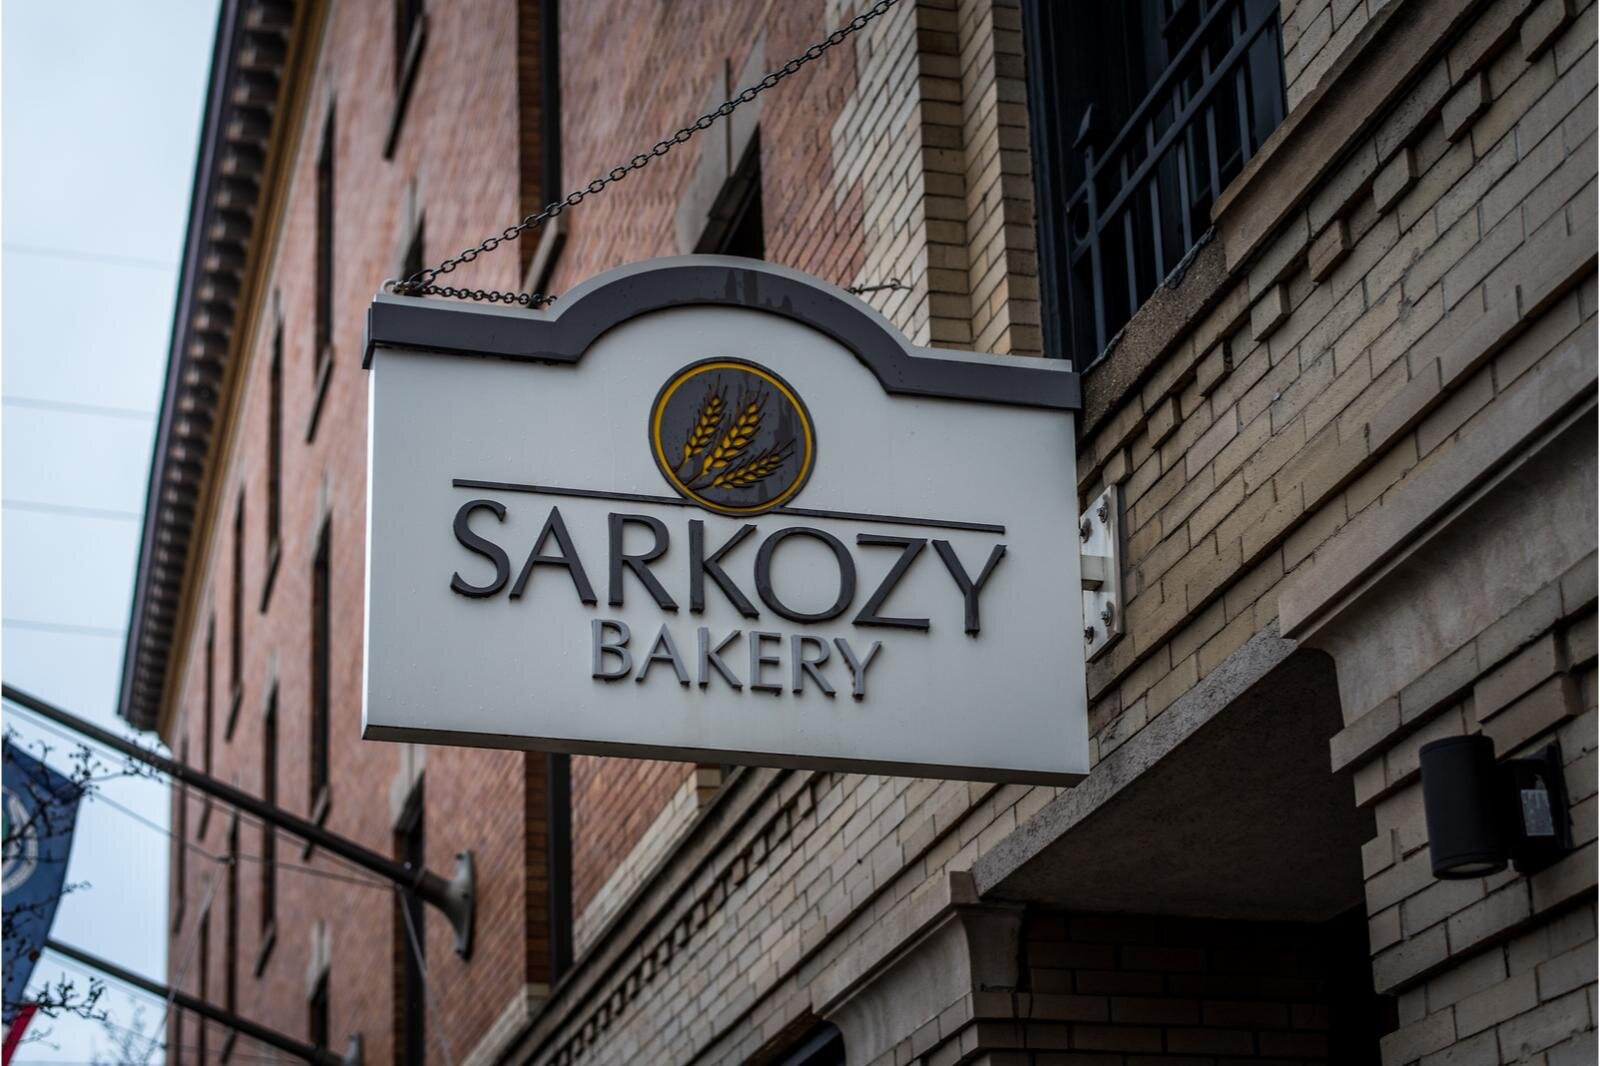 In its second home, Sarkozy Bakery on Michigan Avenue is worth the challenge of parallel parking.